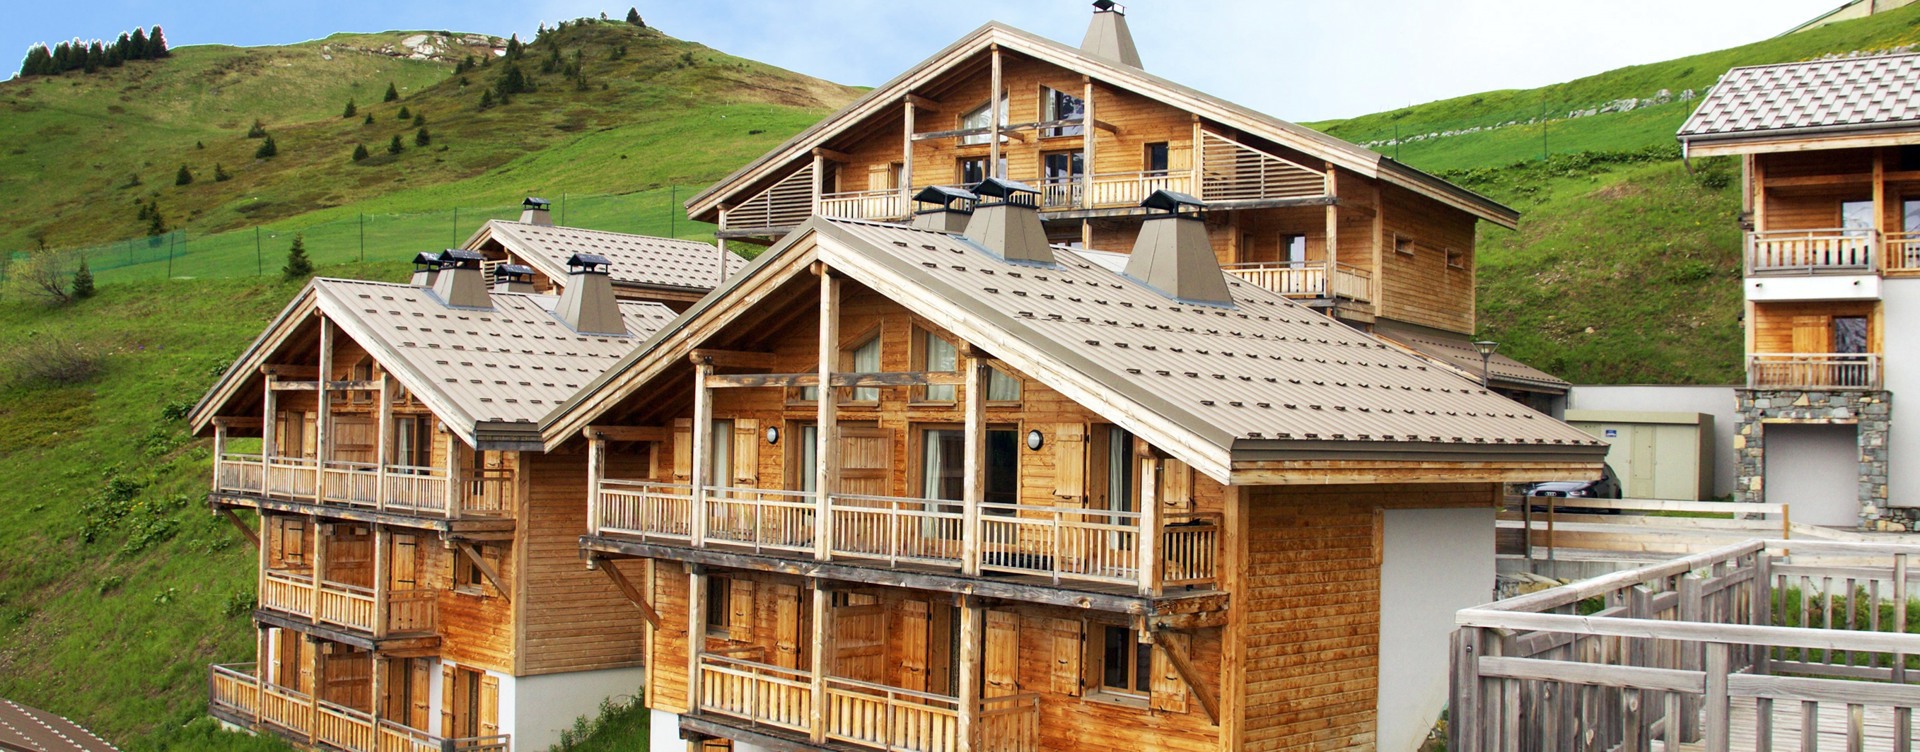 Discover our attractive resort in Flaine,
situated in the French Alps